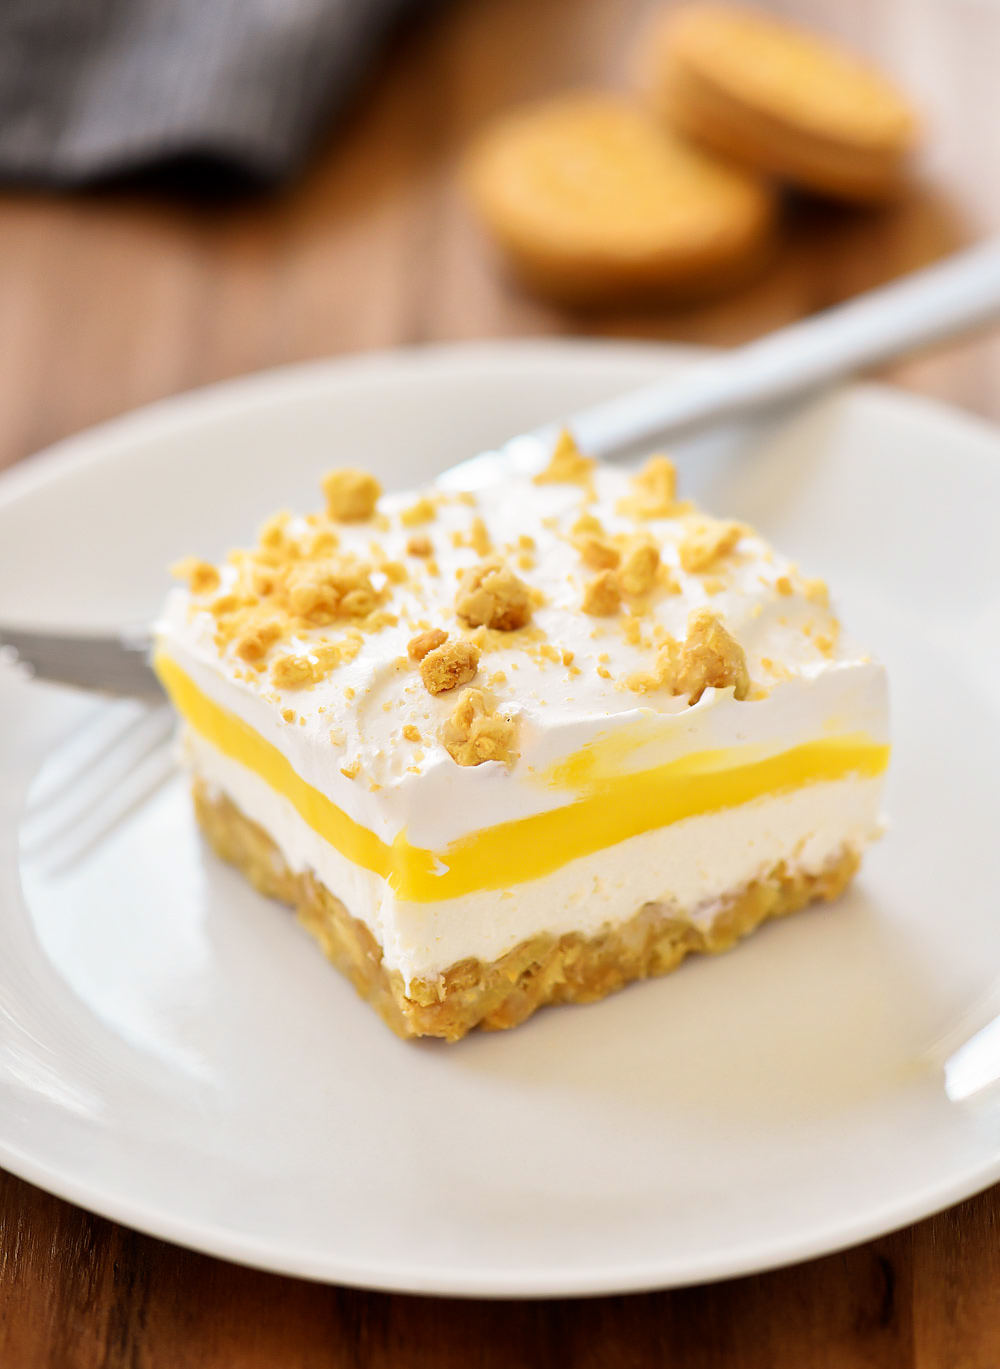 Heavenly Lemon Oreo Dessert has layers of golden oreo cookies, cream cheese, and lemon pudding. Life-in-the-Lofthouse.com